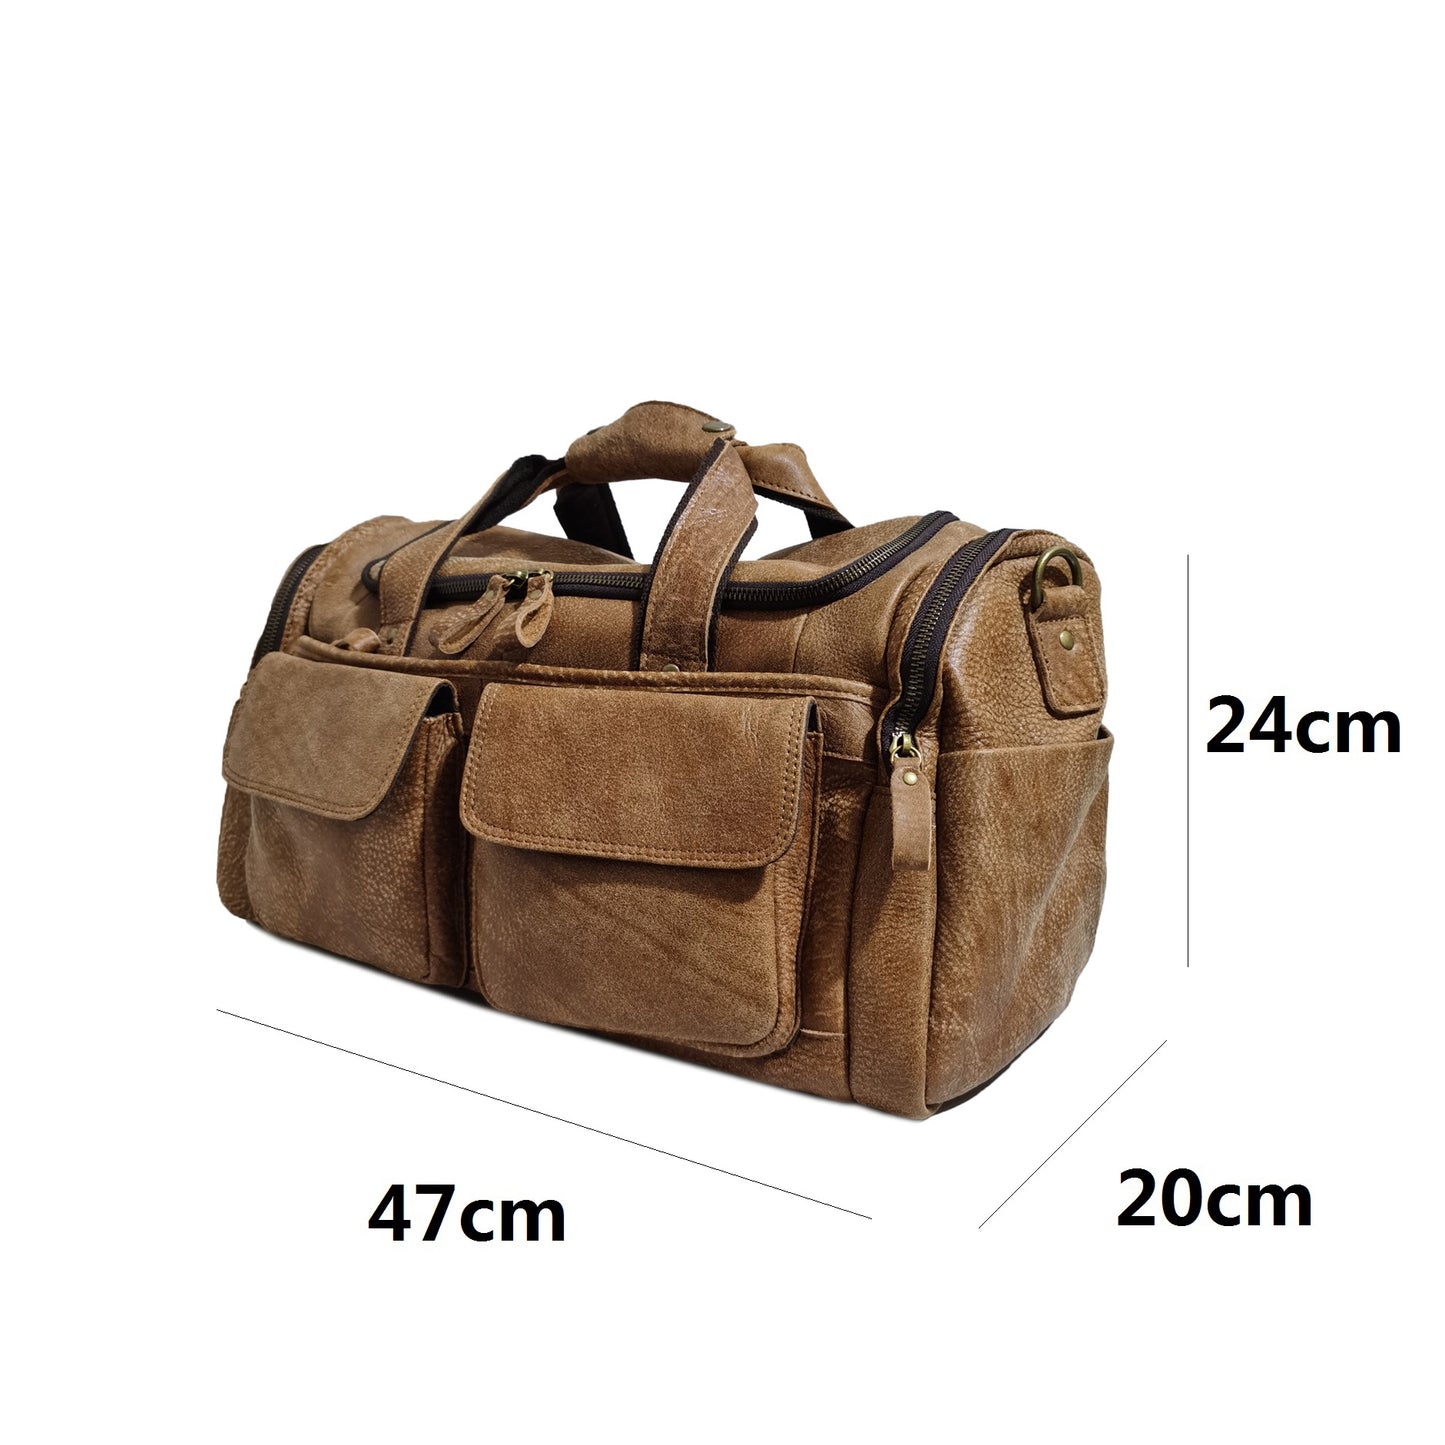 Unisex Women's and Men's genuine cowhide leather duffel travel bag Poches design